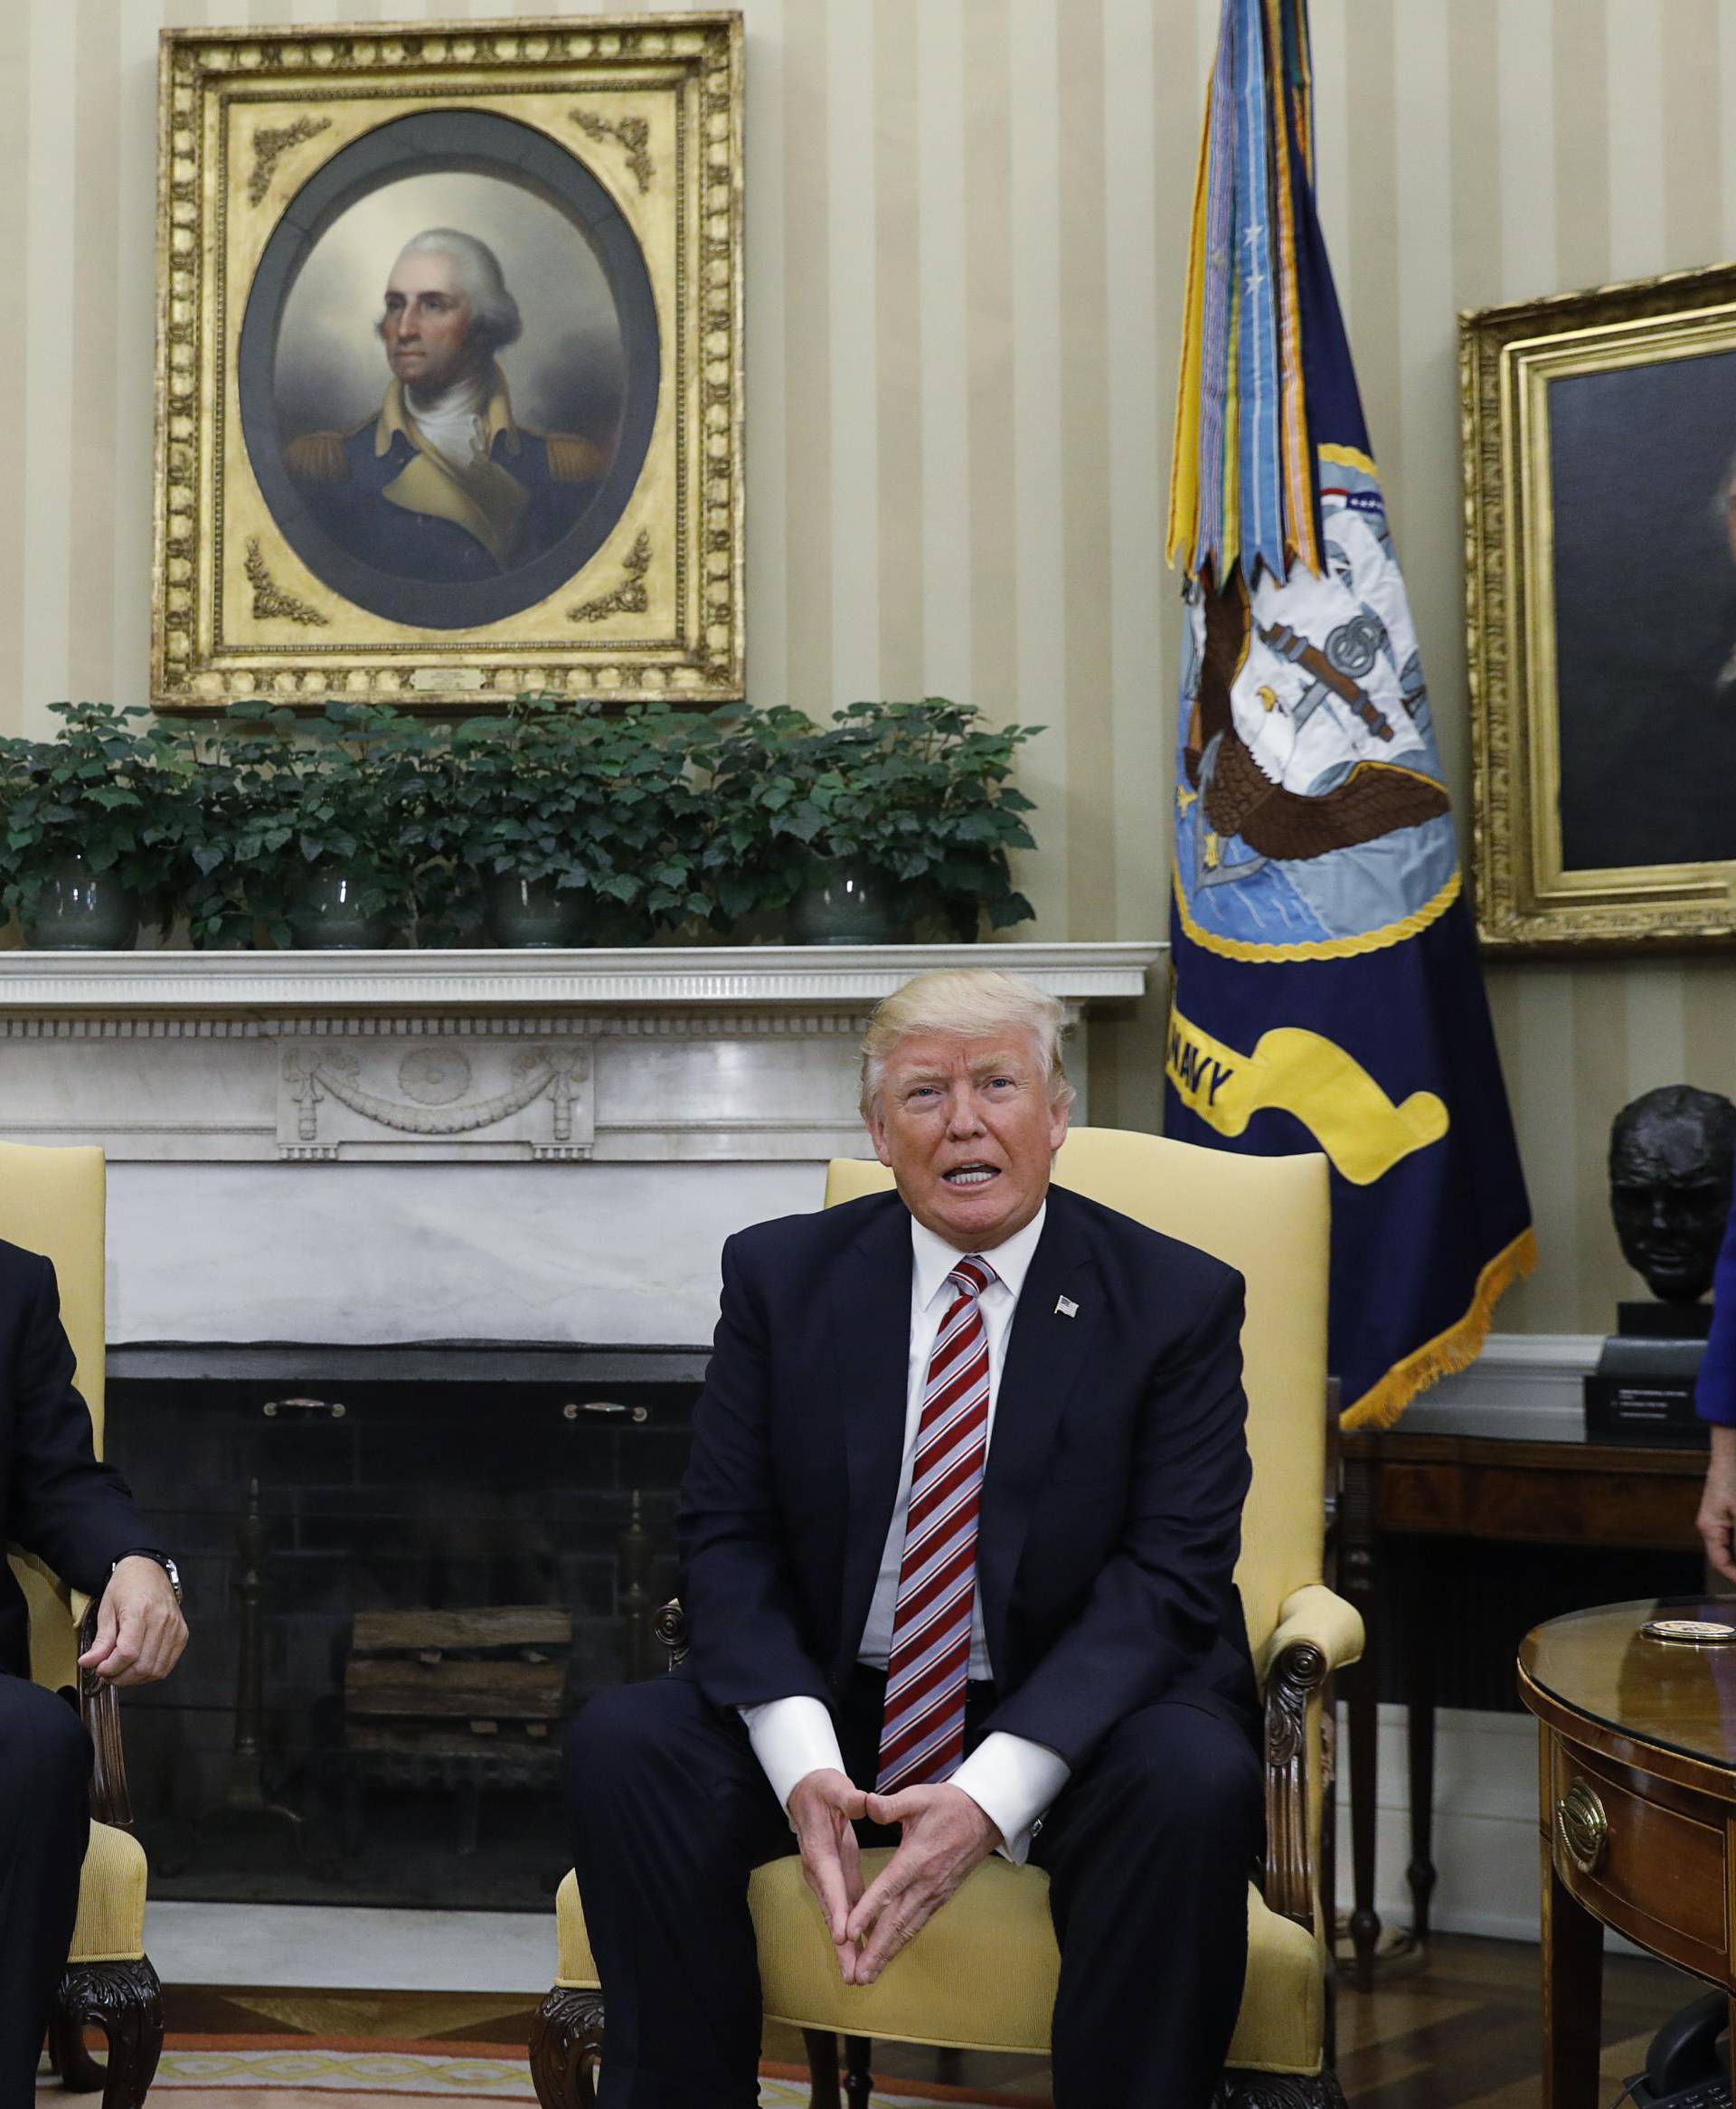 Turkey's President Erdogan meets with U.S. President Trump in the Oval Office of the White House in Washington